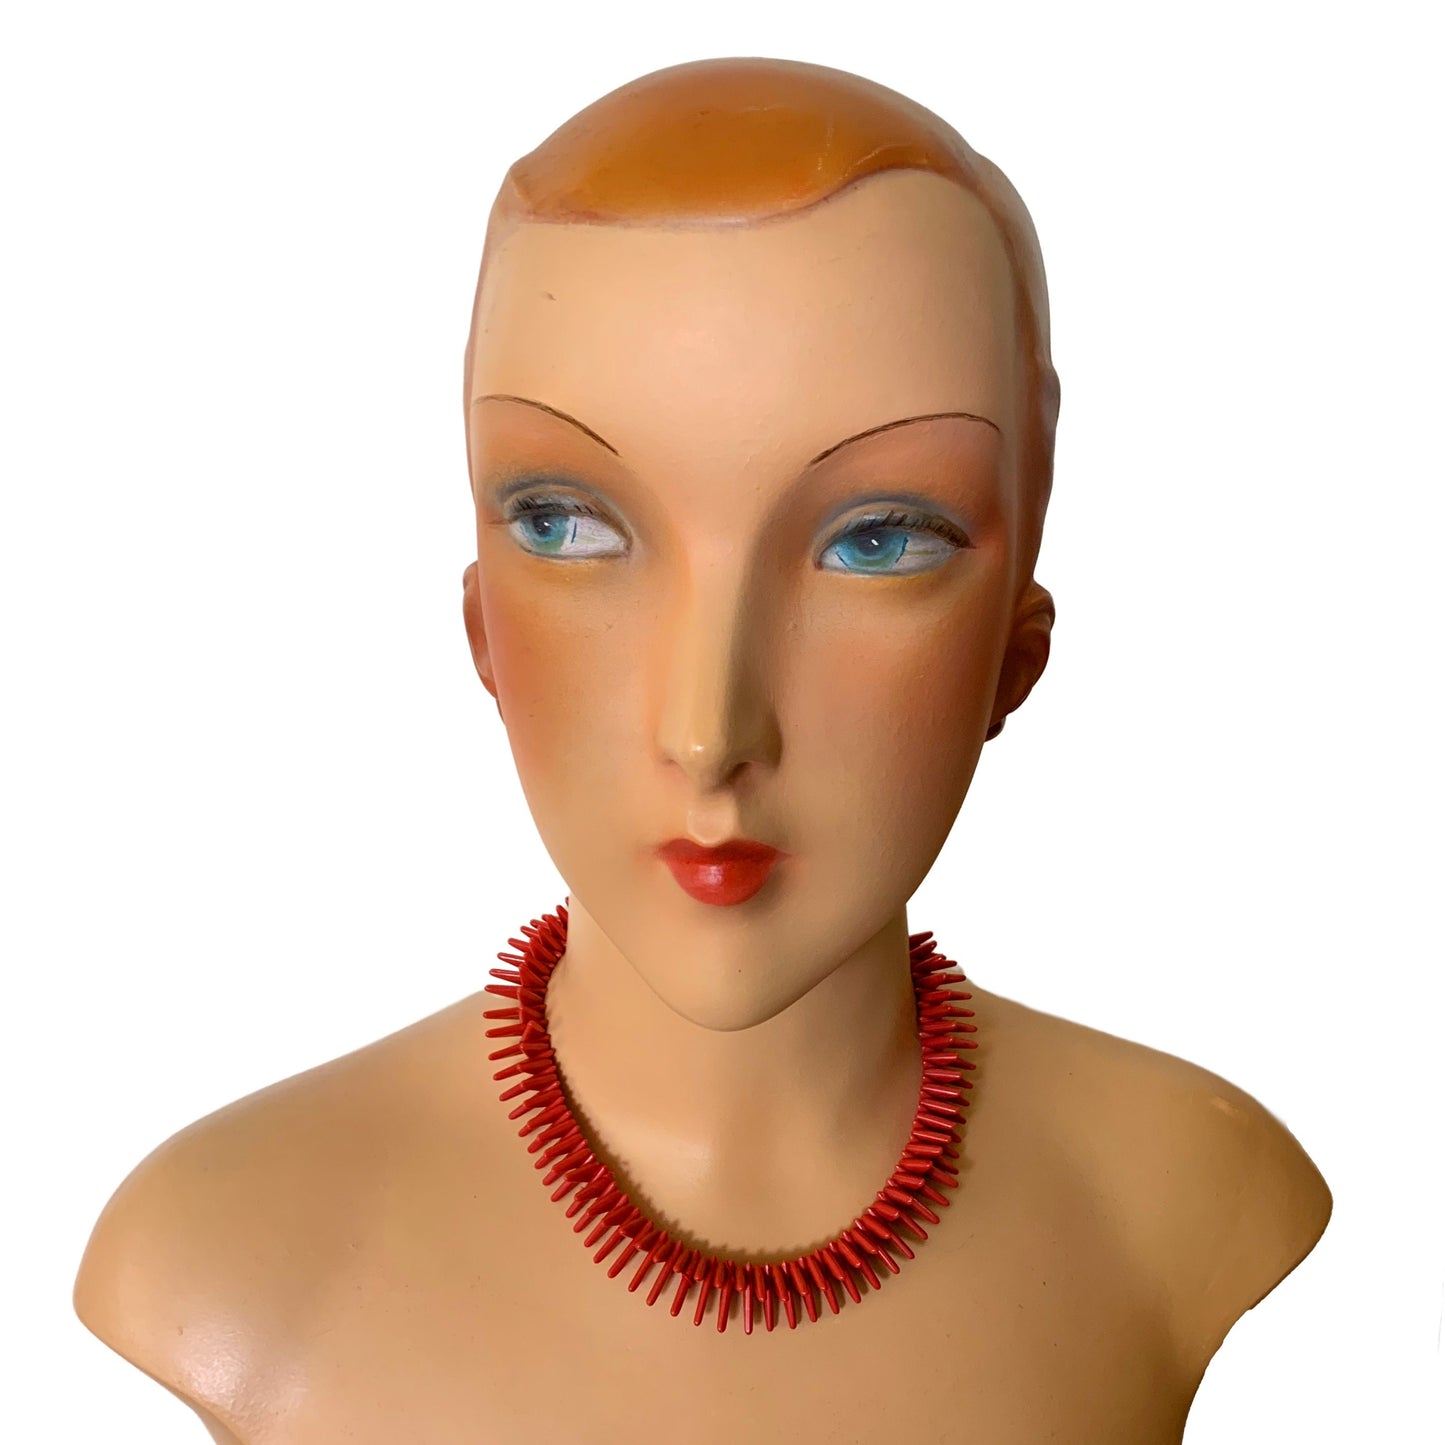 1950s Plastic Pointed Necklace